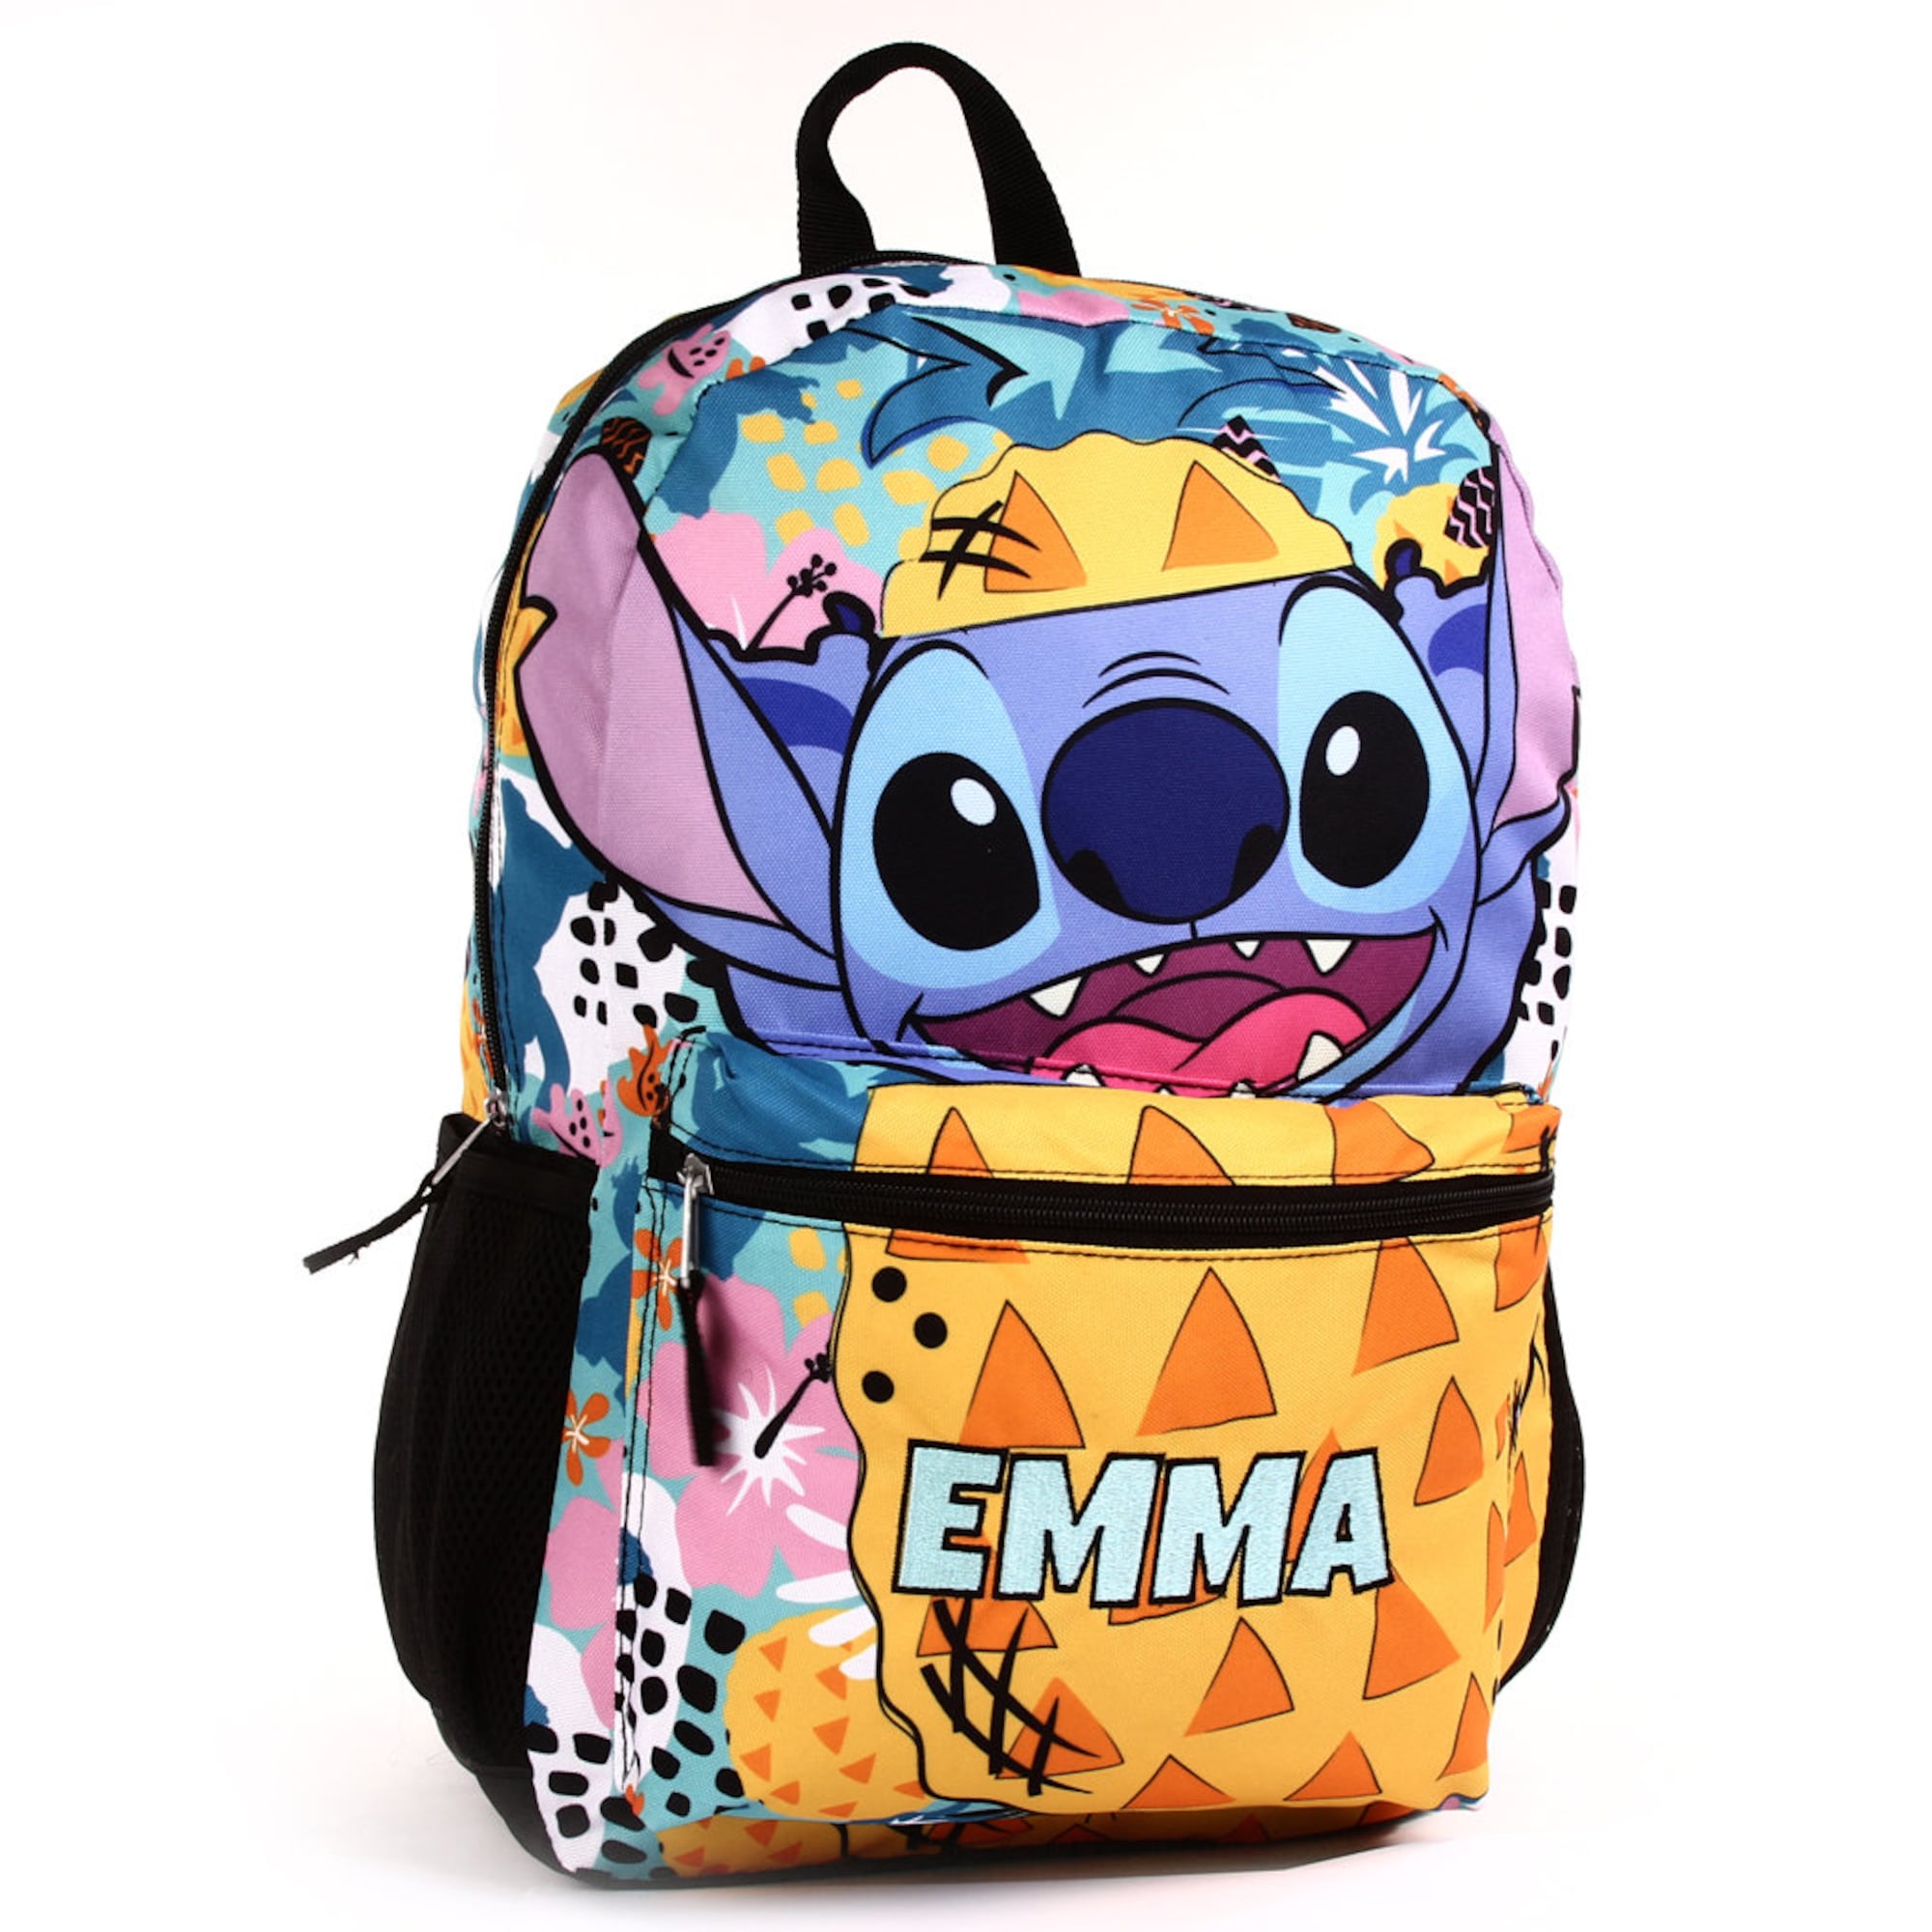 Personalized Disney Stitch Backpack, backpacks for school